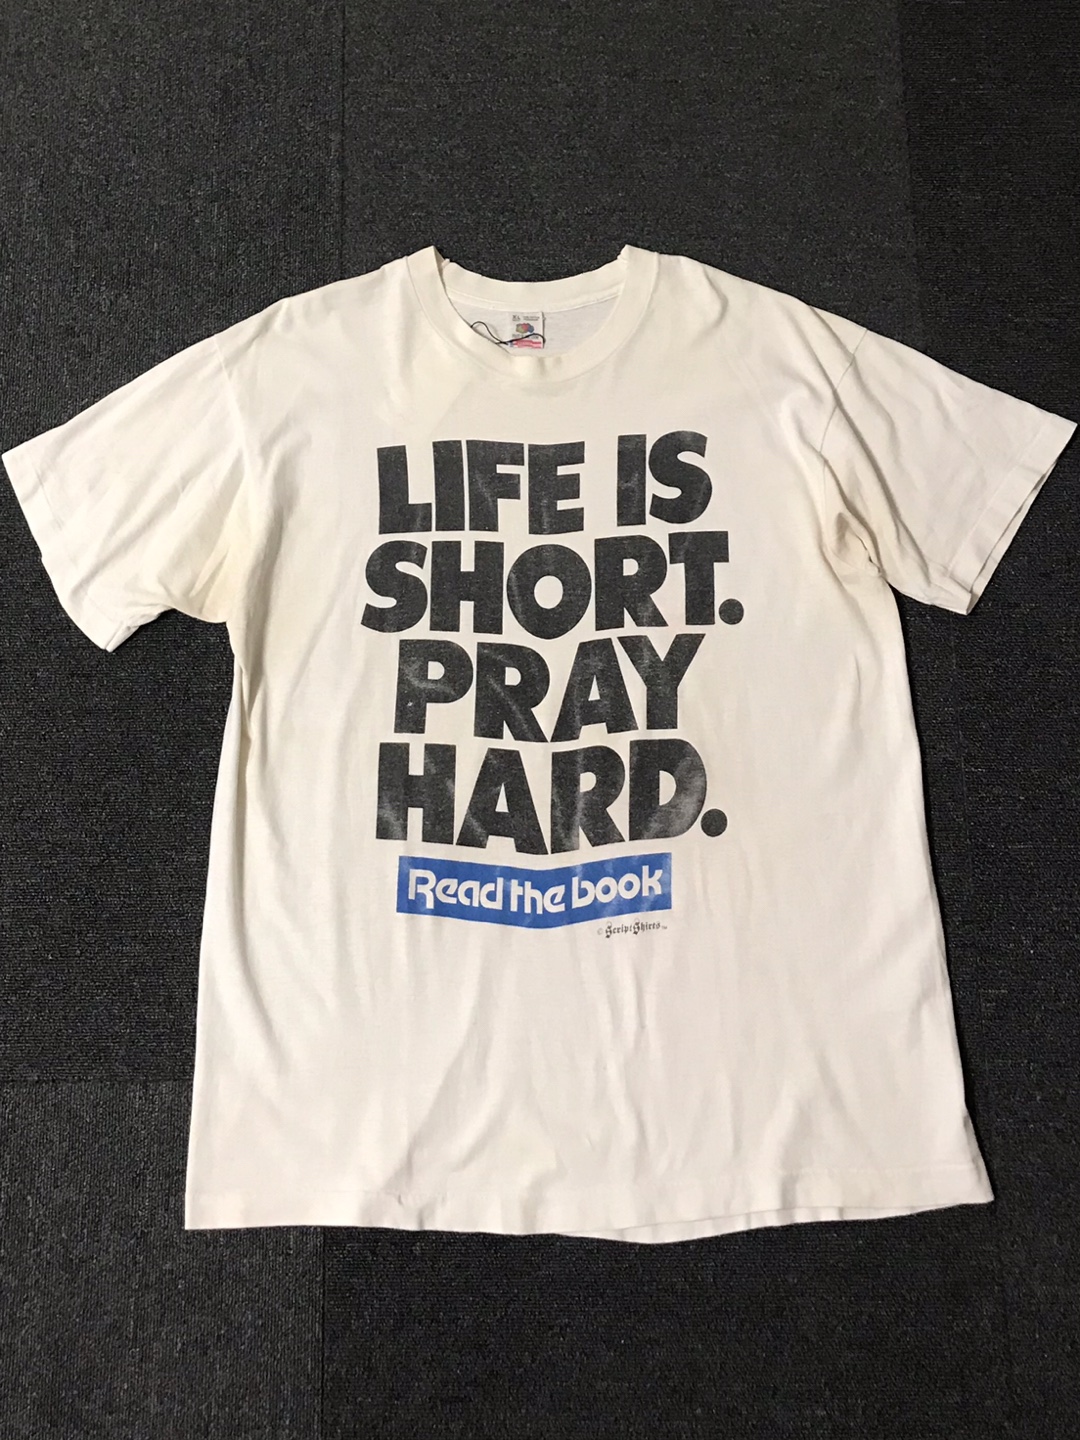 90s ‘ LIFE IS SHORT. PRAY HARD. read the book ‘ USA made (XL size, 100~ 추천)